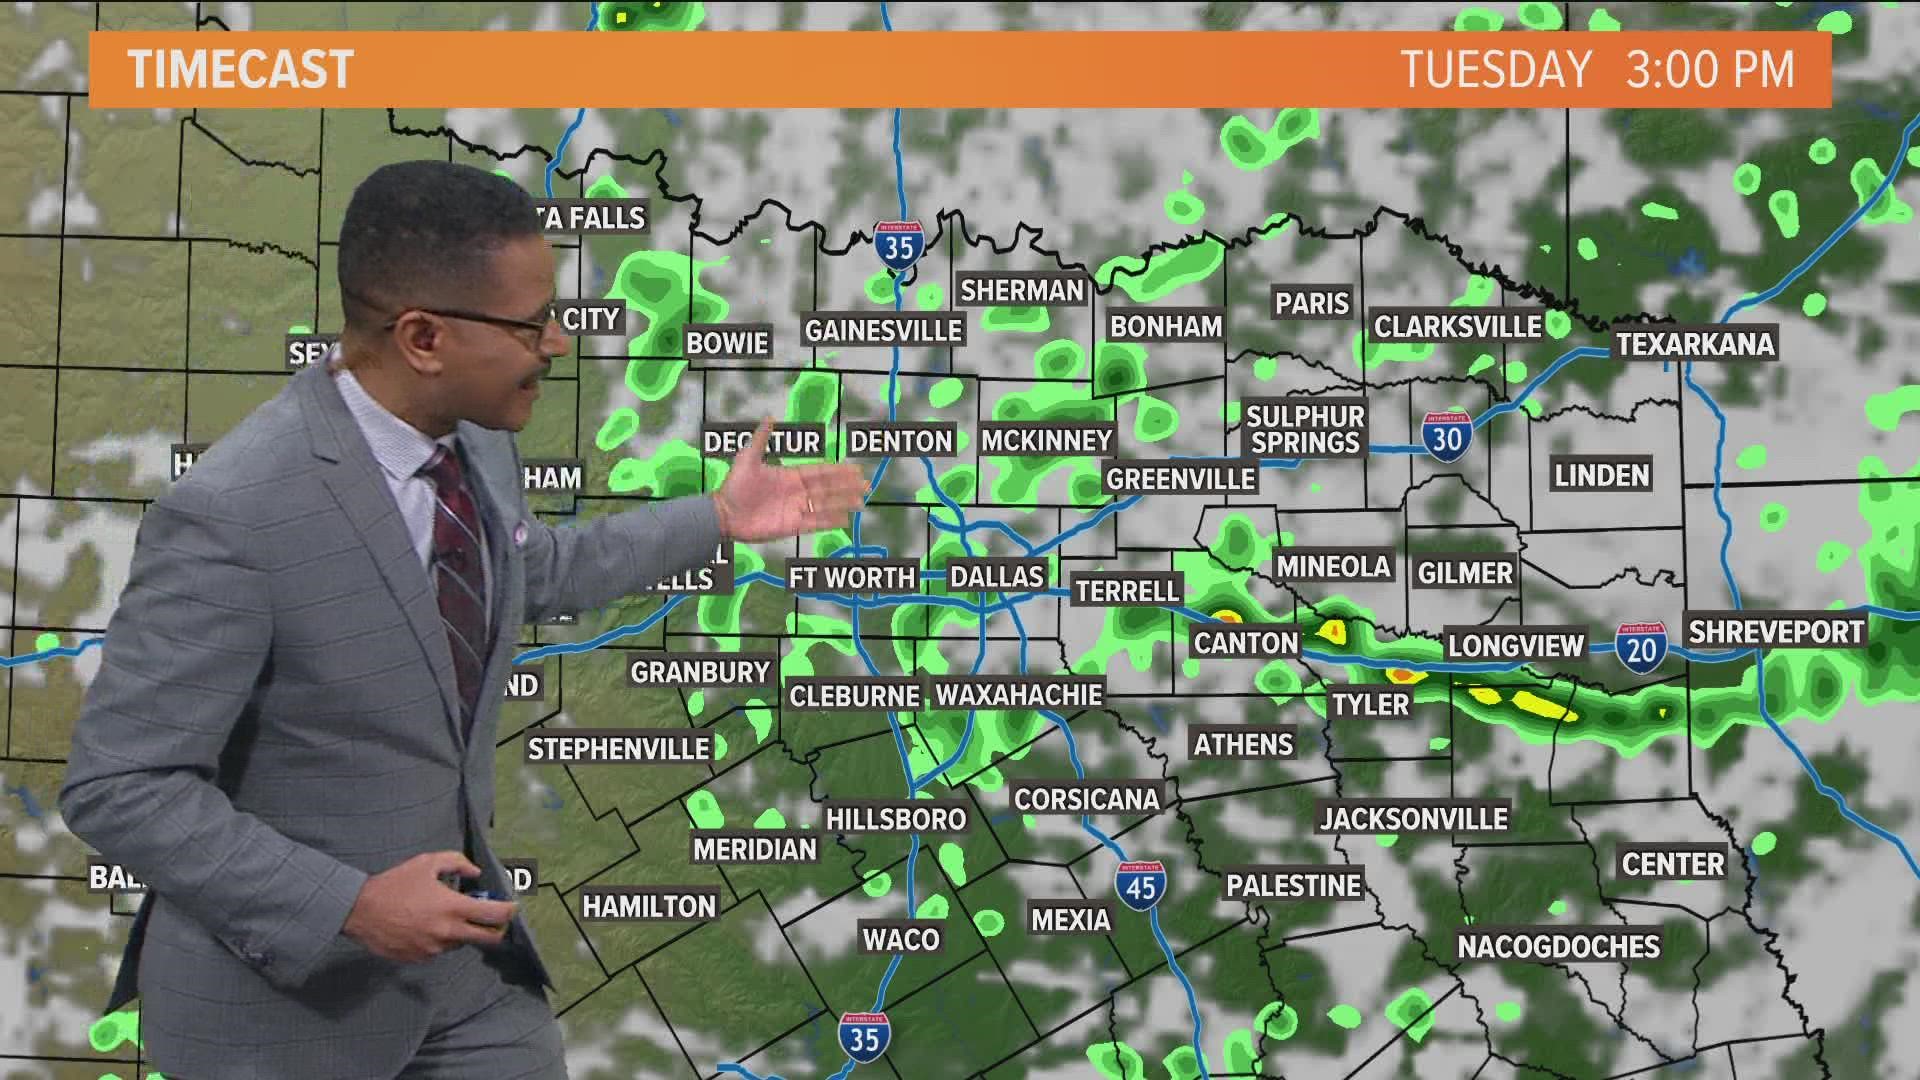 We still have a chance of lingering showers across North Texas.